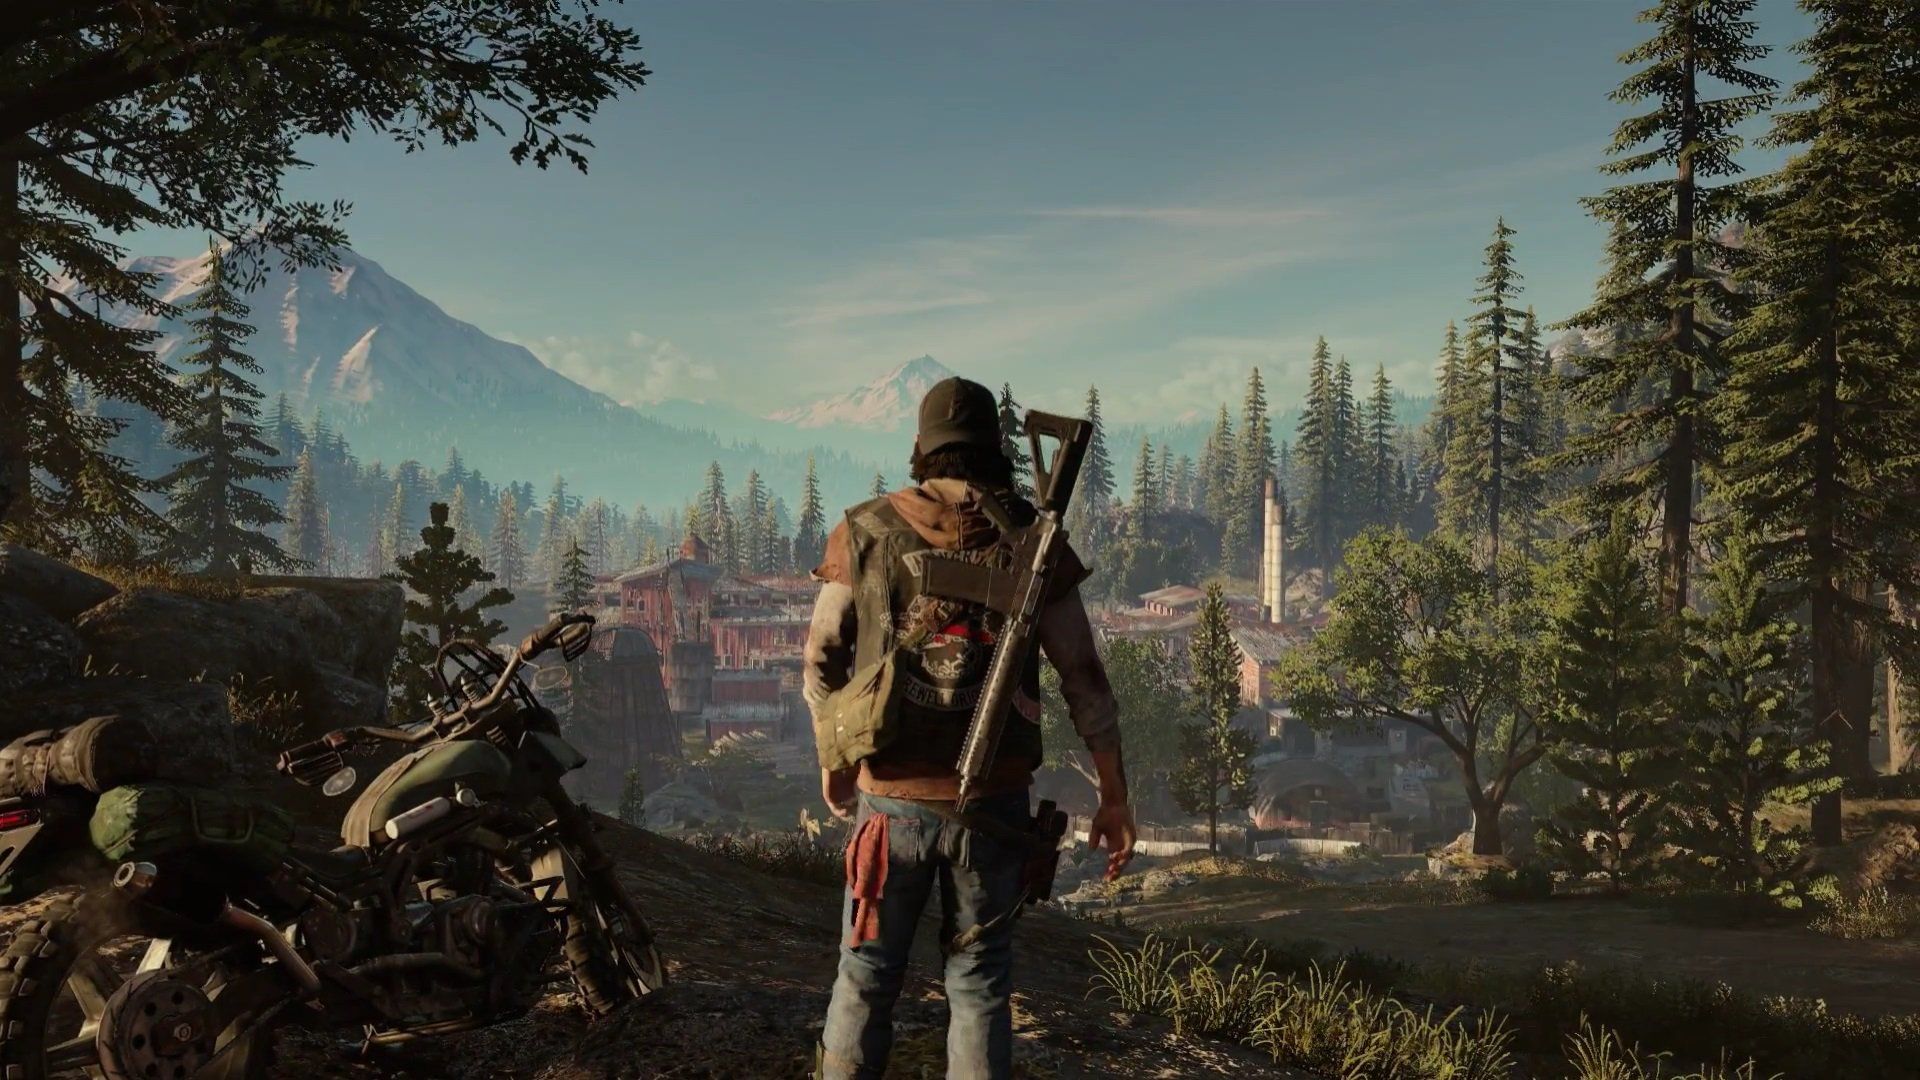 Days Gone Gets 7 Minutes of Gameplay Footage During E3 2017